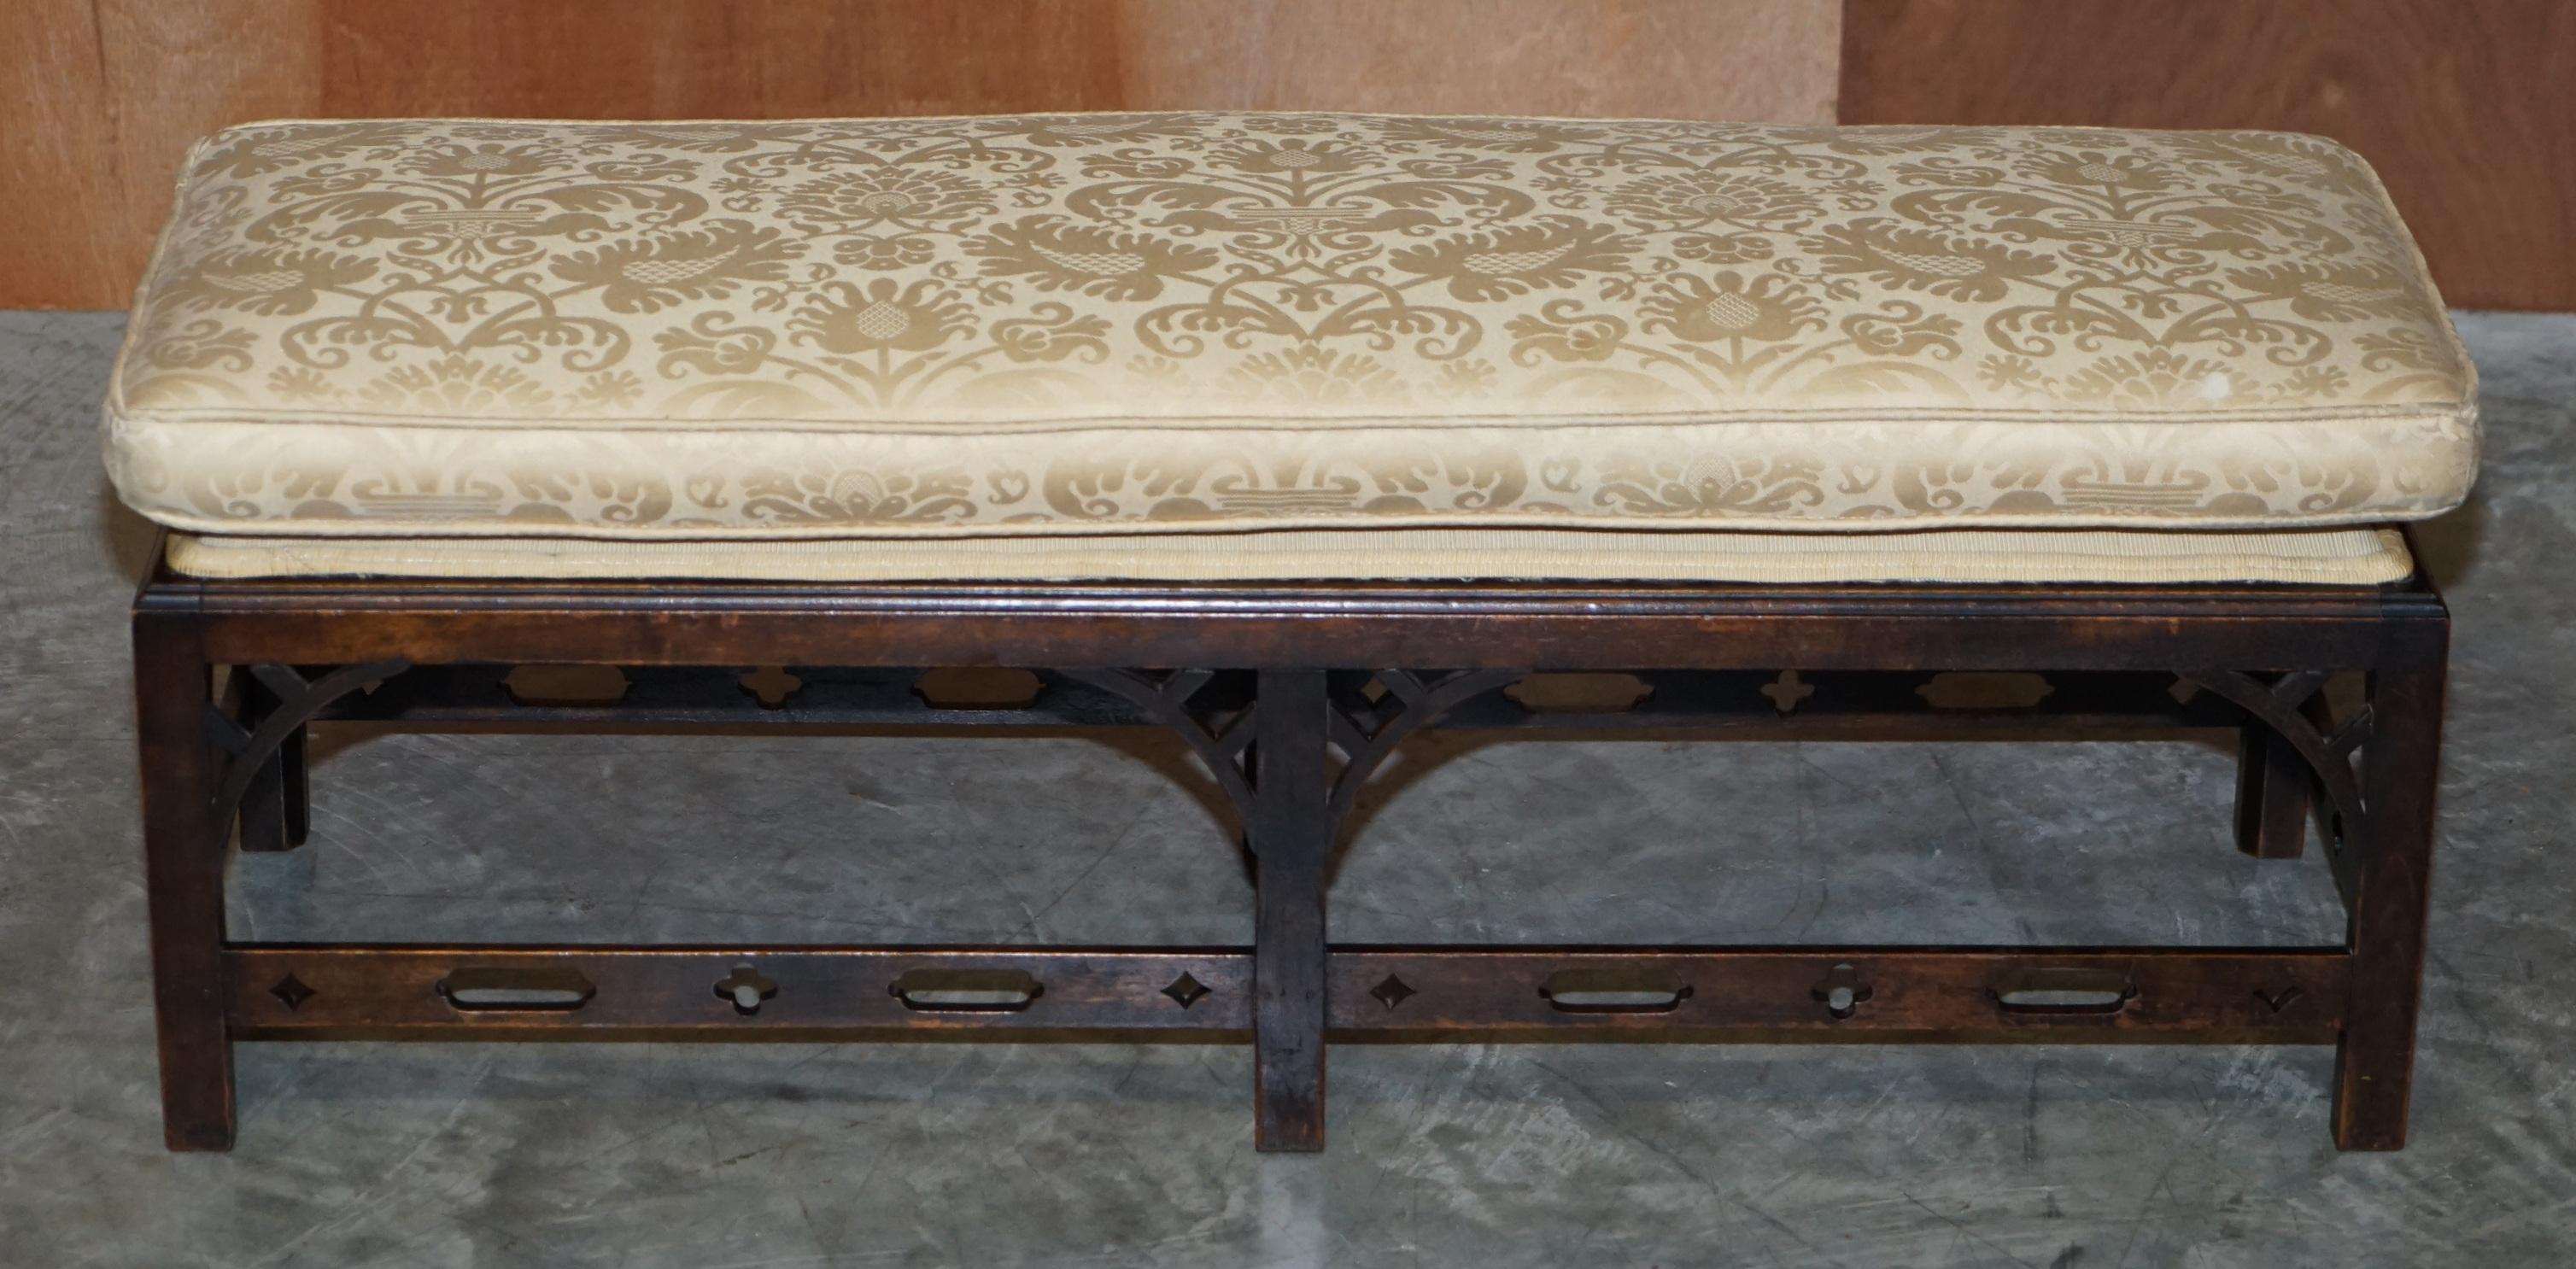 We are delighted to offer for sale this lovely circa 1800 Georgian two person bench footstool with Thomas Chippendale manner fretwork carving 

A good Georgian example in lovely original condition. The frame has a lovely fretwork carved base which